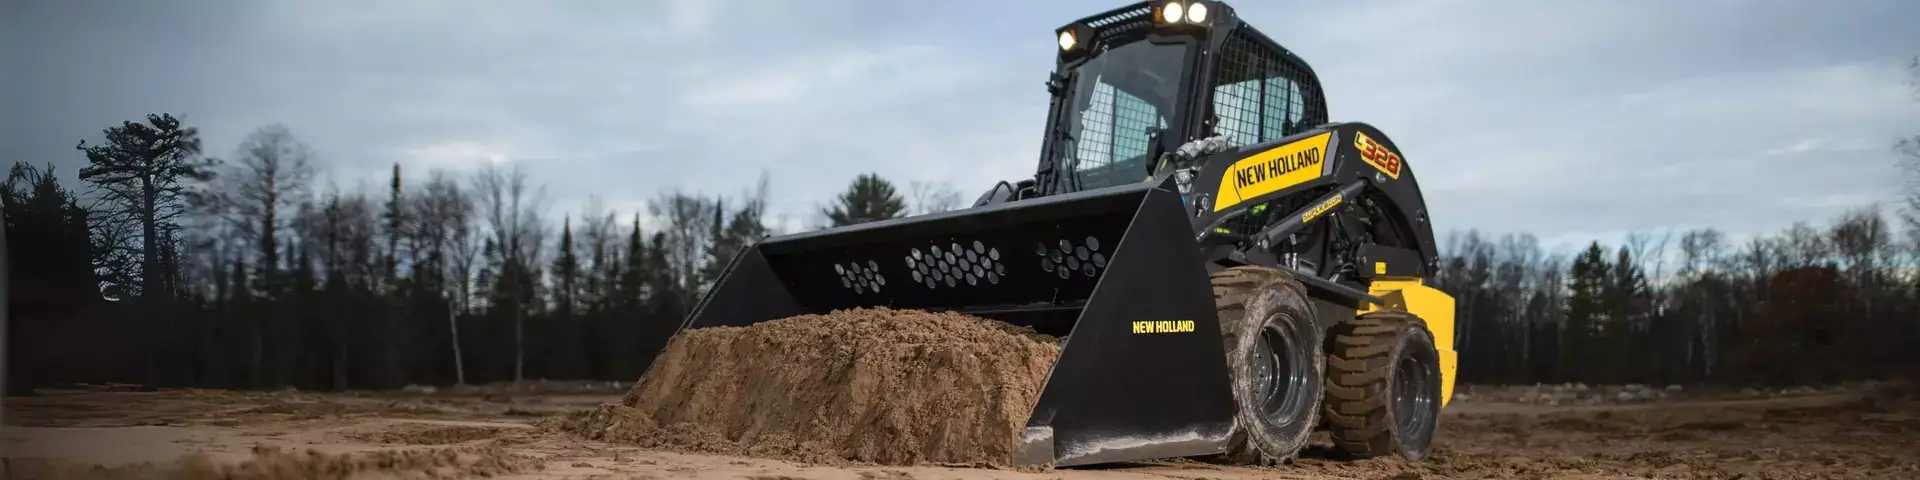 New Holland Construction Attachments